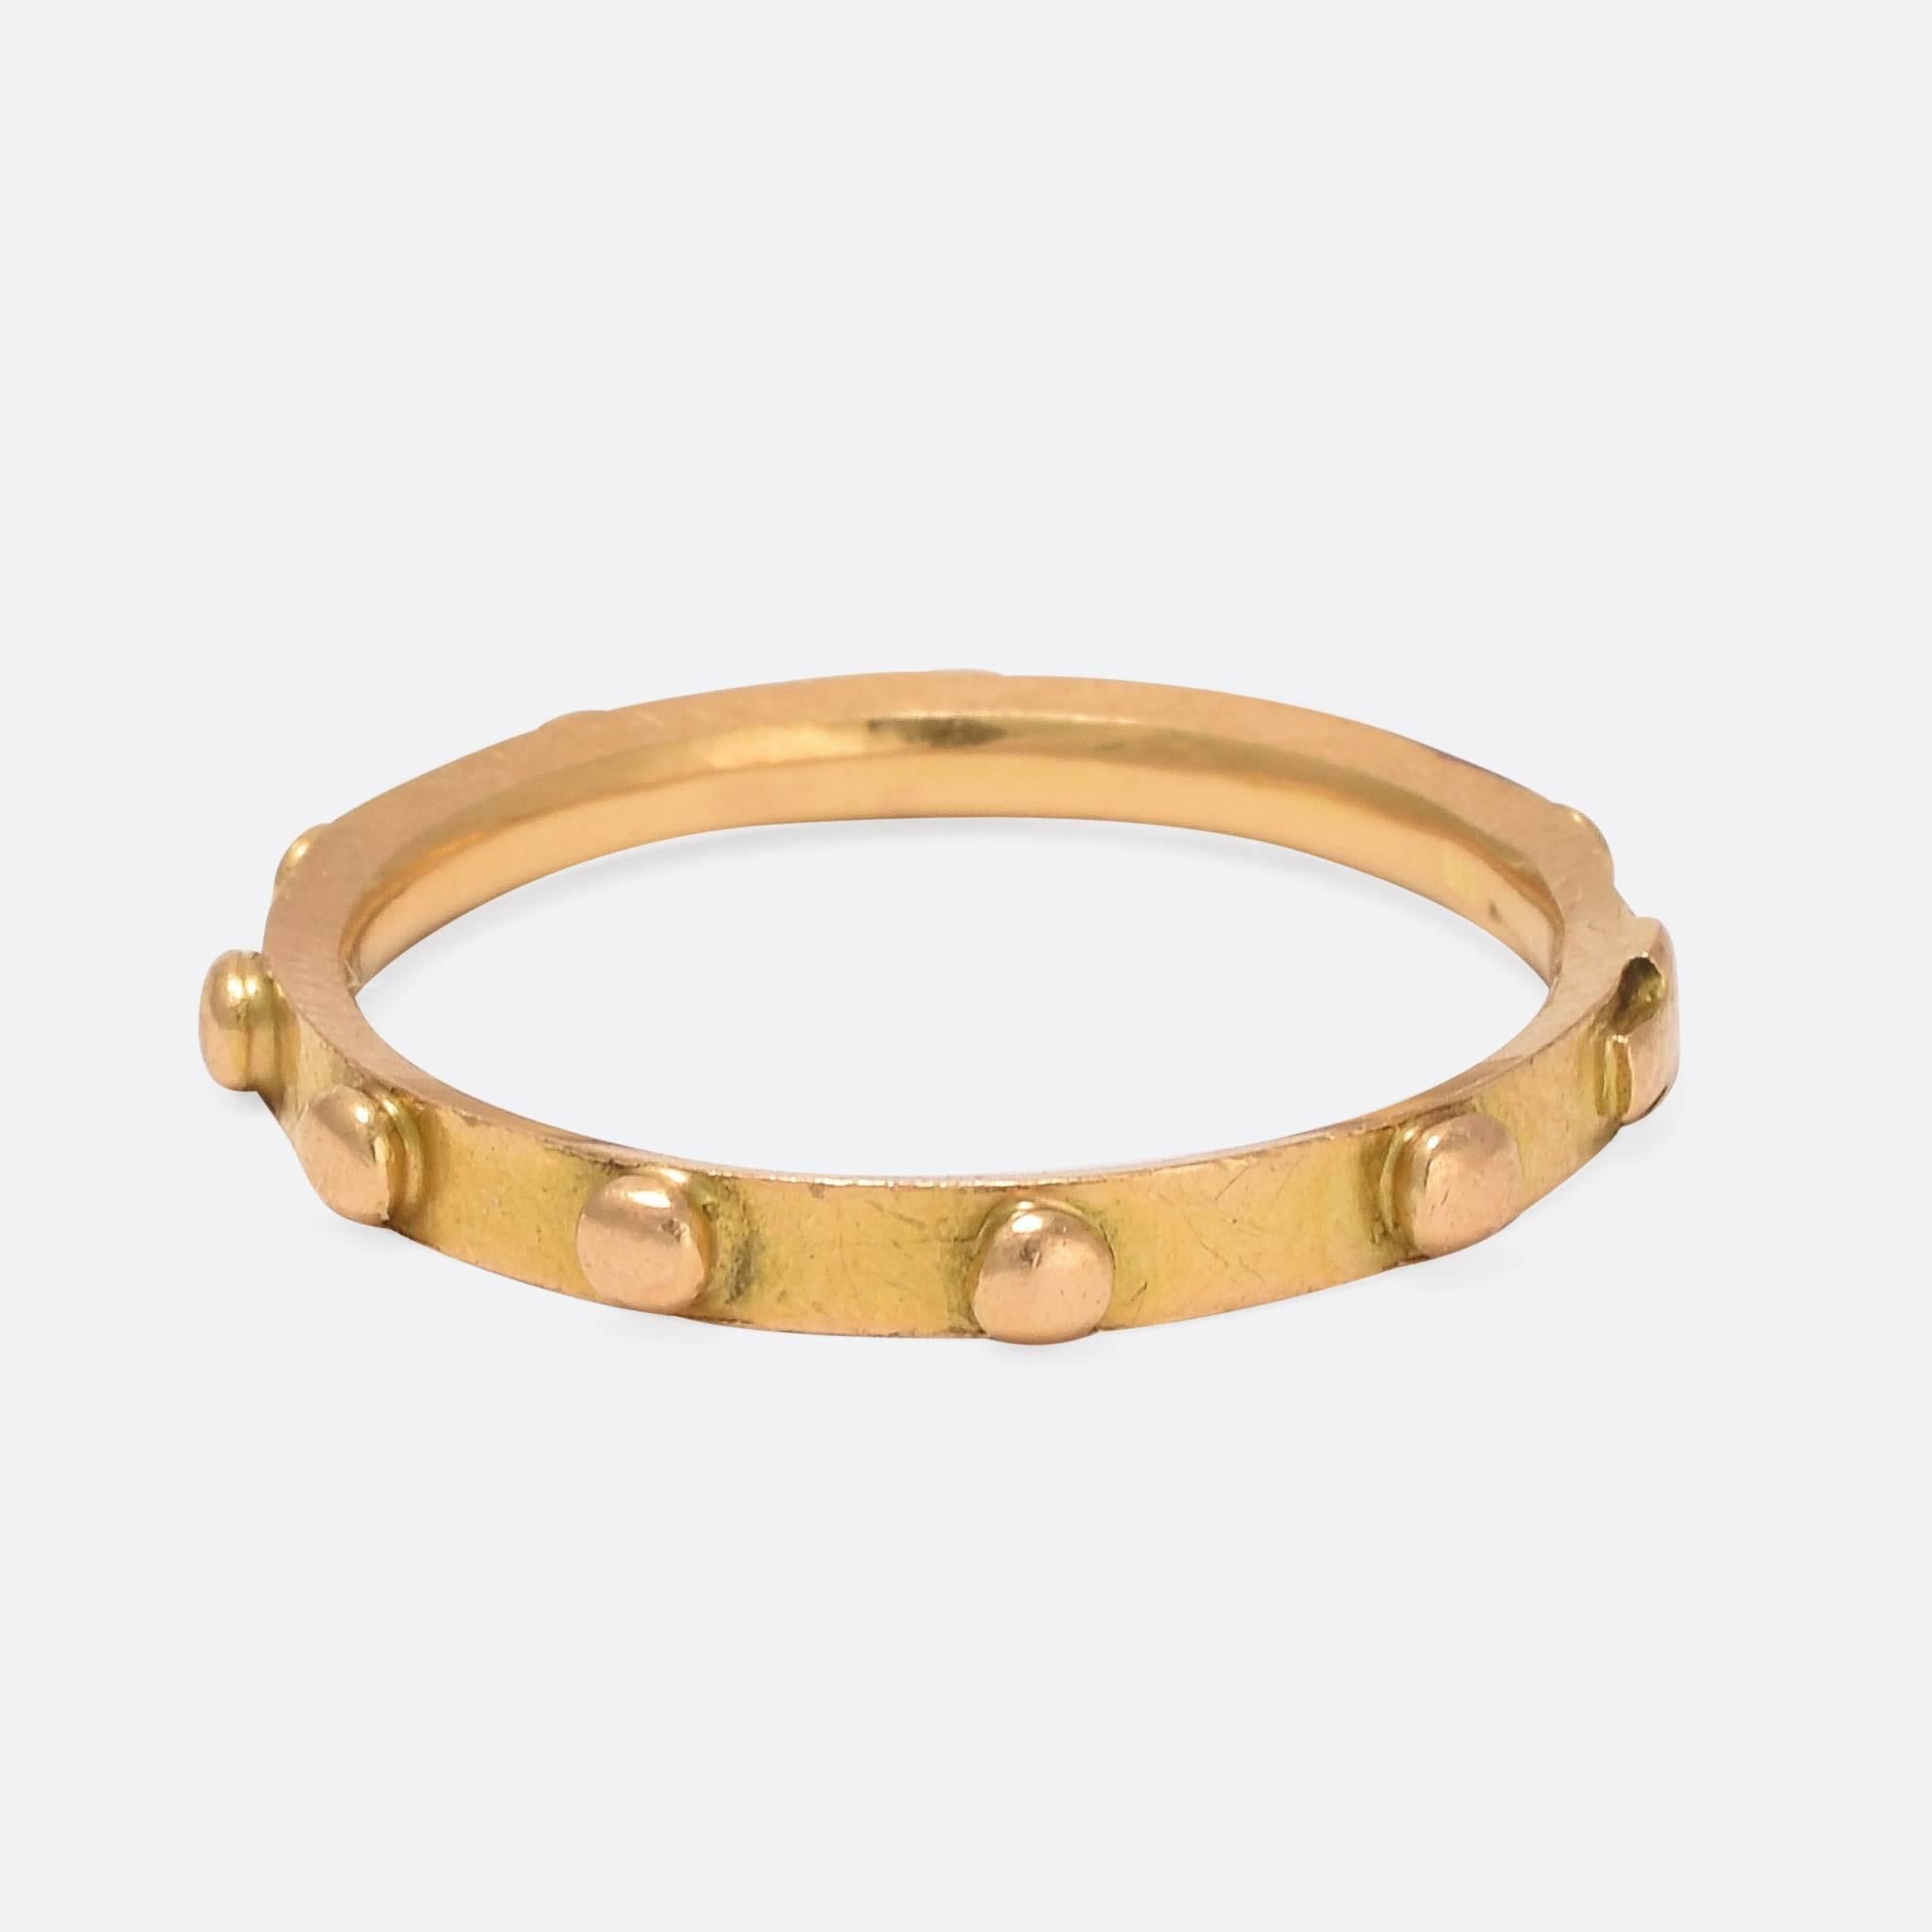 This antique rosary ring features a cross, along with ten studs - representing the one decade of a rosary. It likely belonged to a priest or a nun, and has been well used, with some wear to the cross and studs. Modelled in 15ct yellow gold, it dates